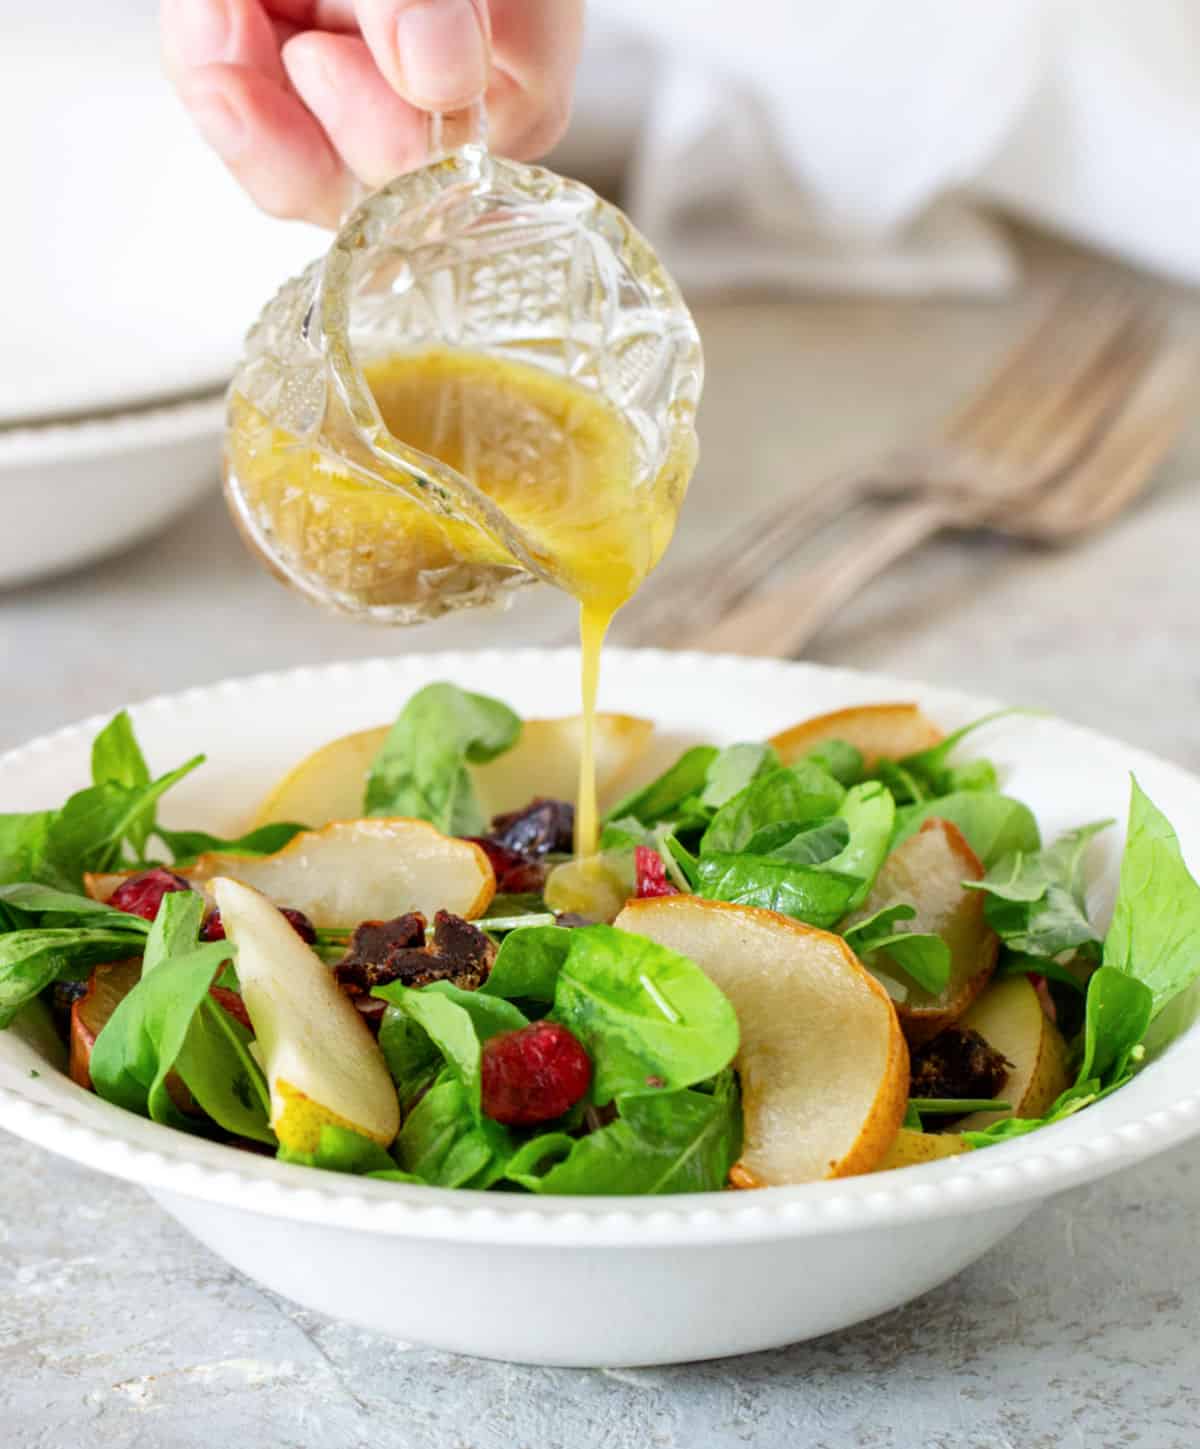 Pouring thick vinaigrette over white plate with arugula and pear salad. Grey surface. 